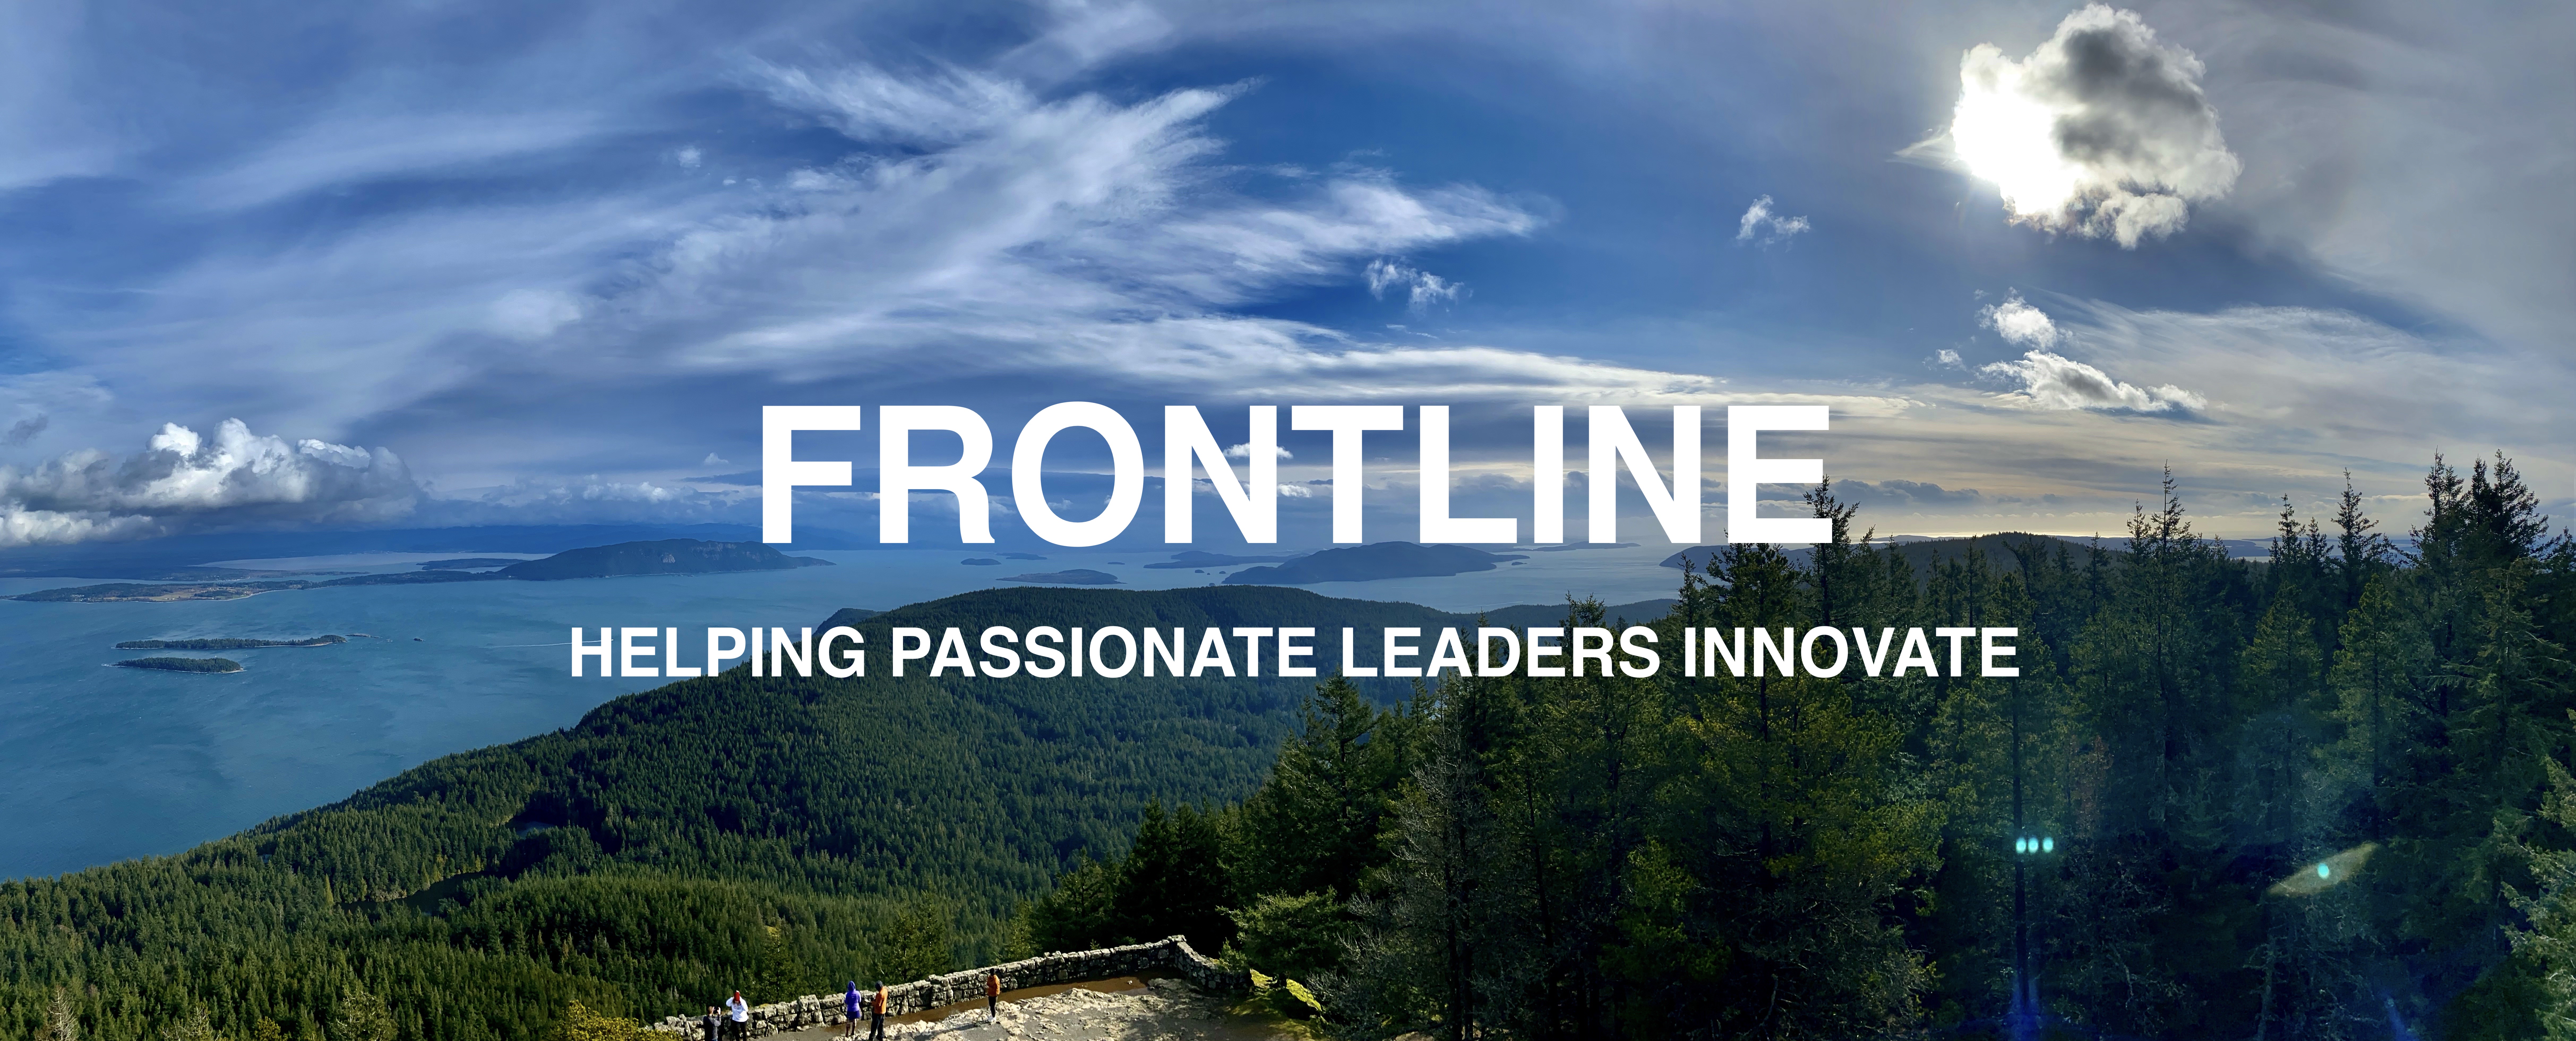 Frontline Group Banner Helping Passionate Leaders Innovate